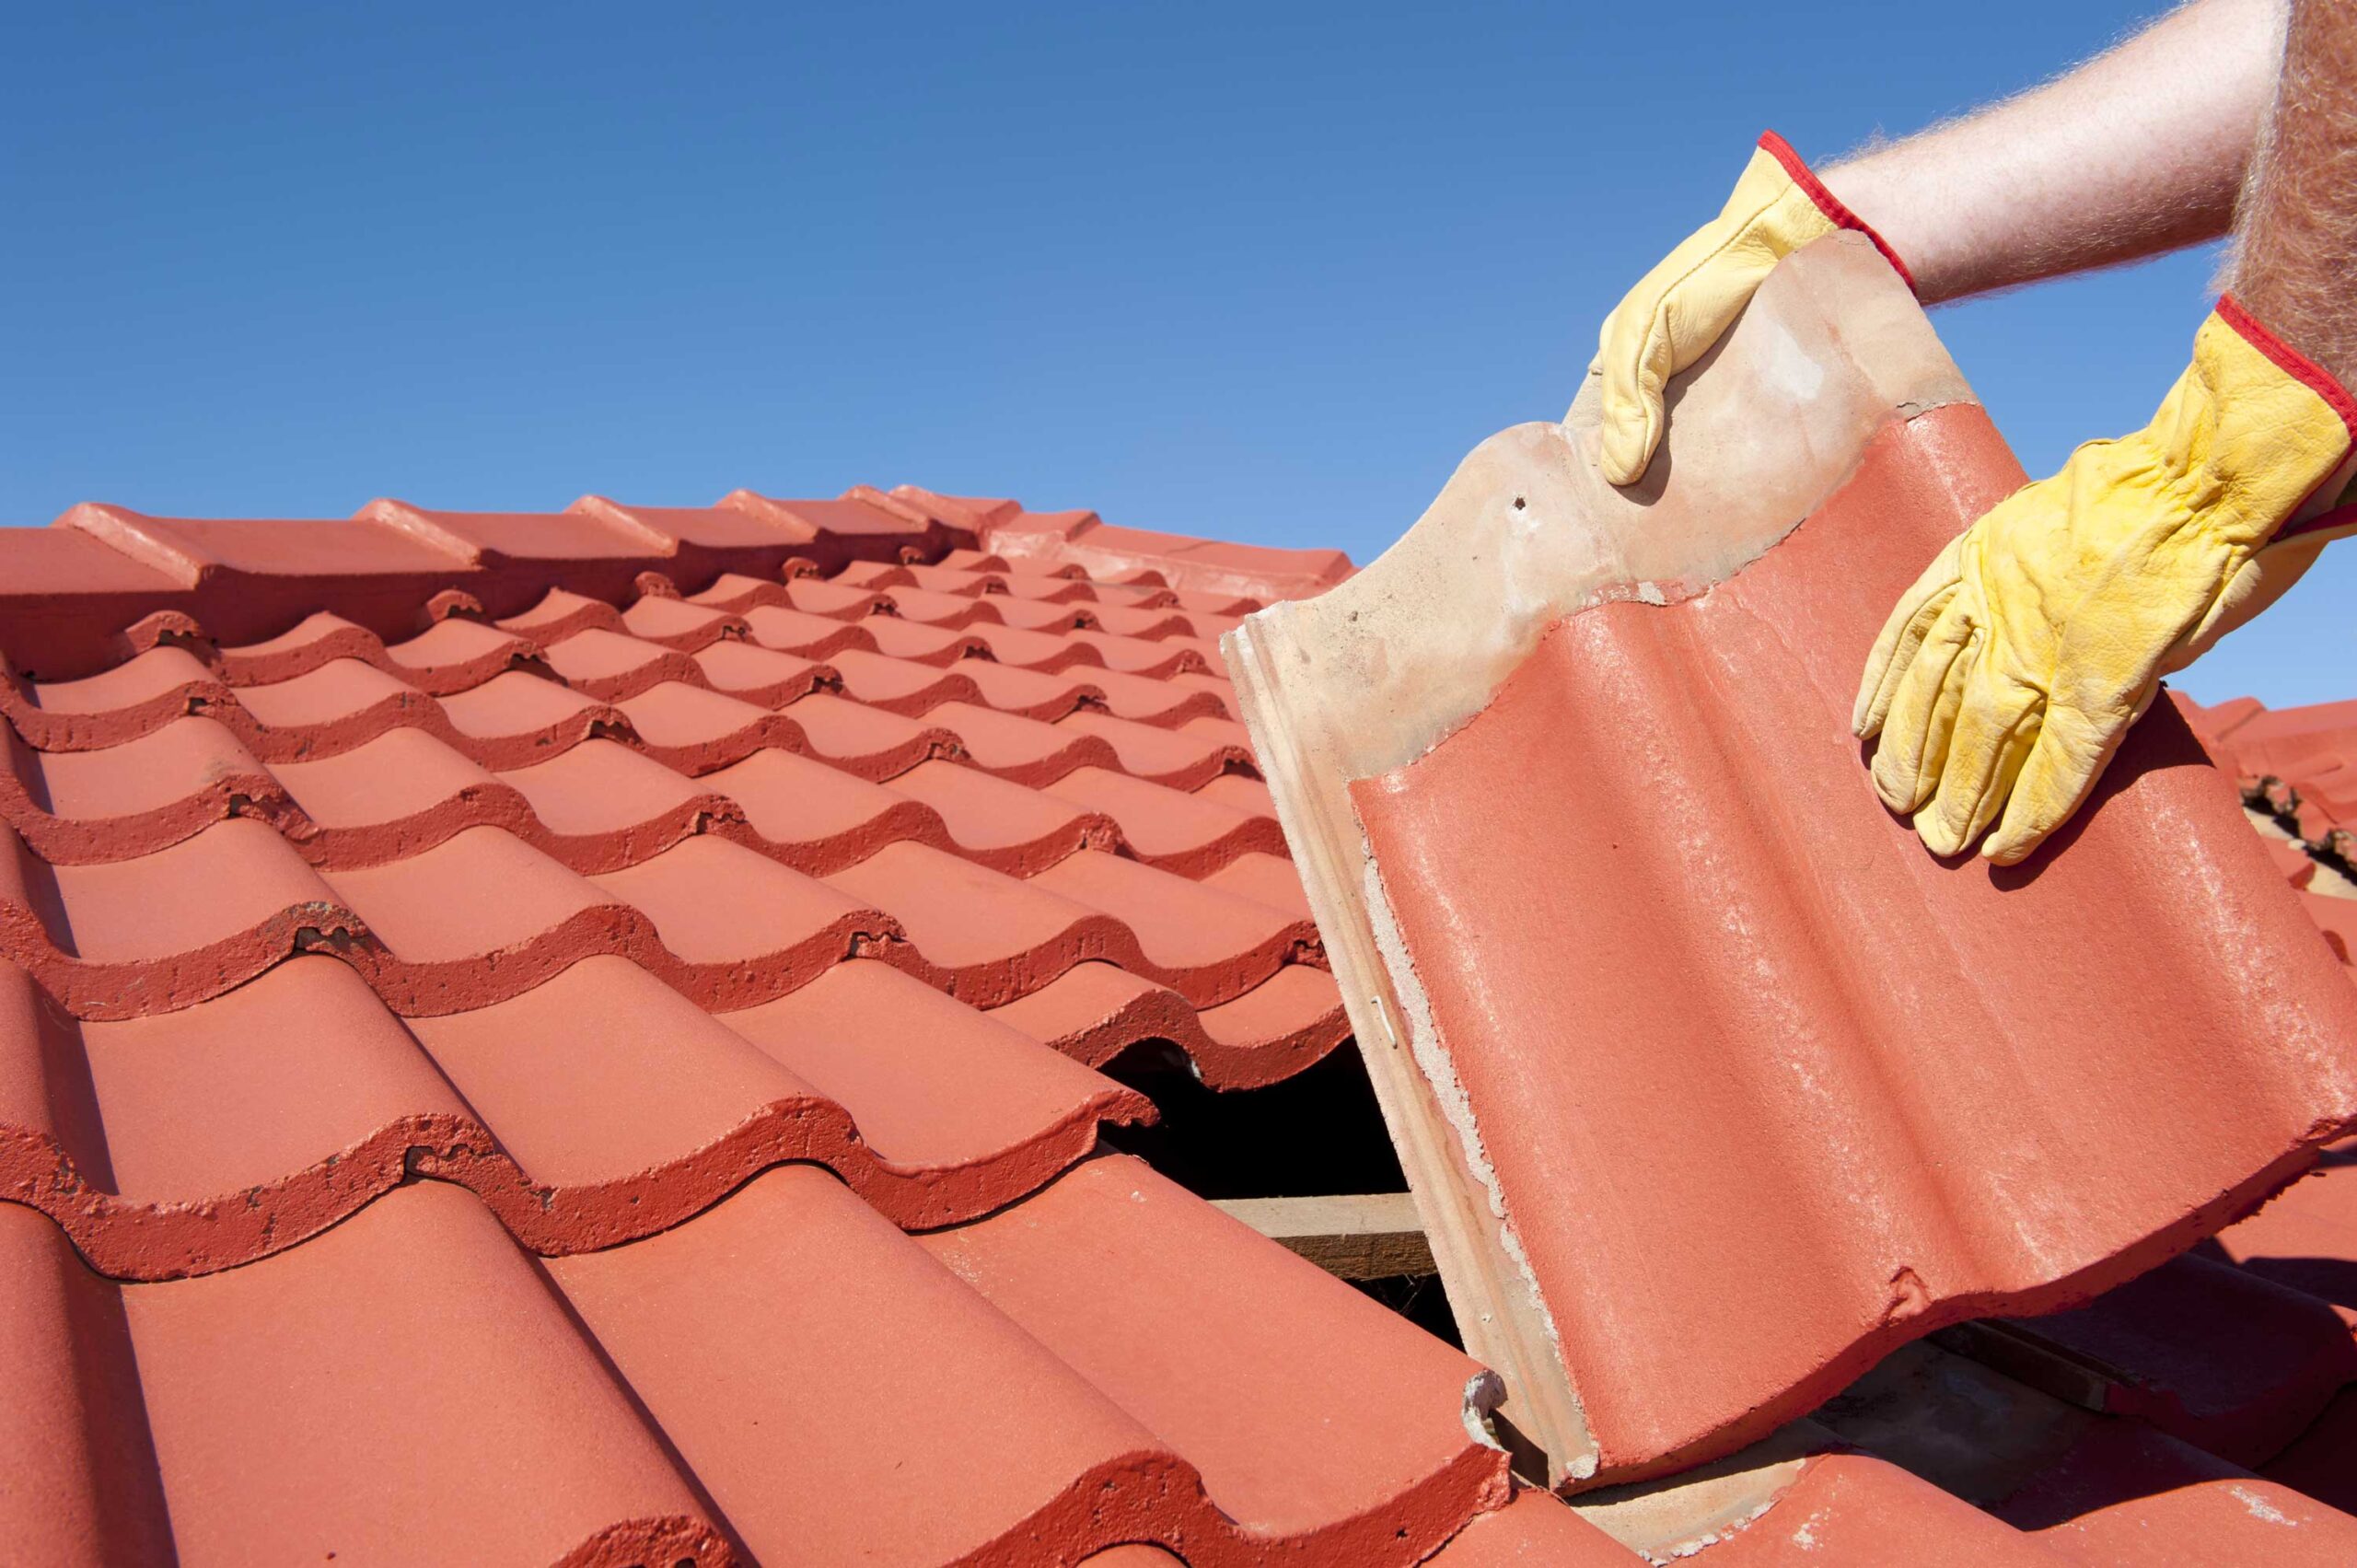 clay tile roofing benefits, clay tile roof features, clay tile roofing guide